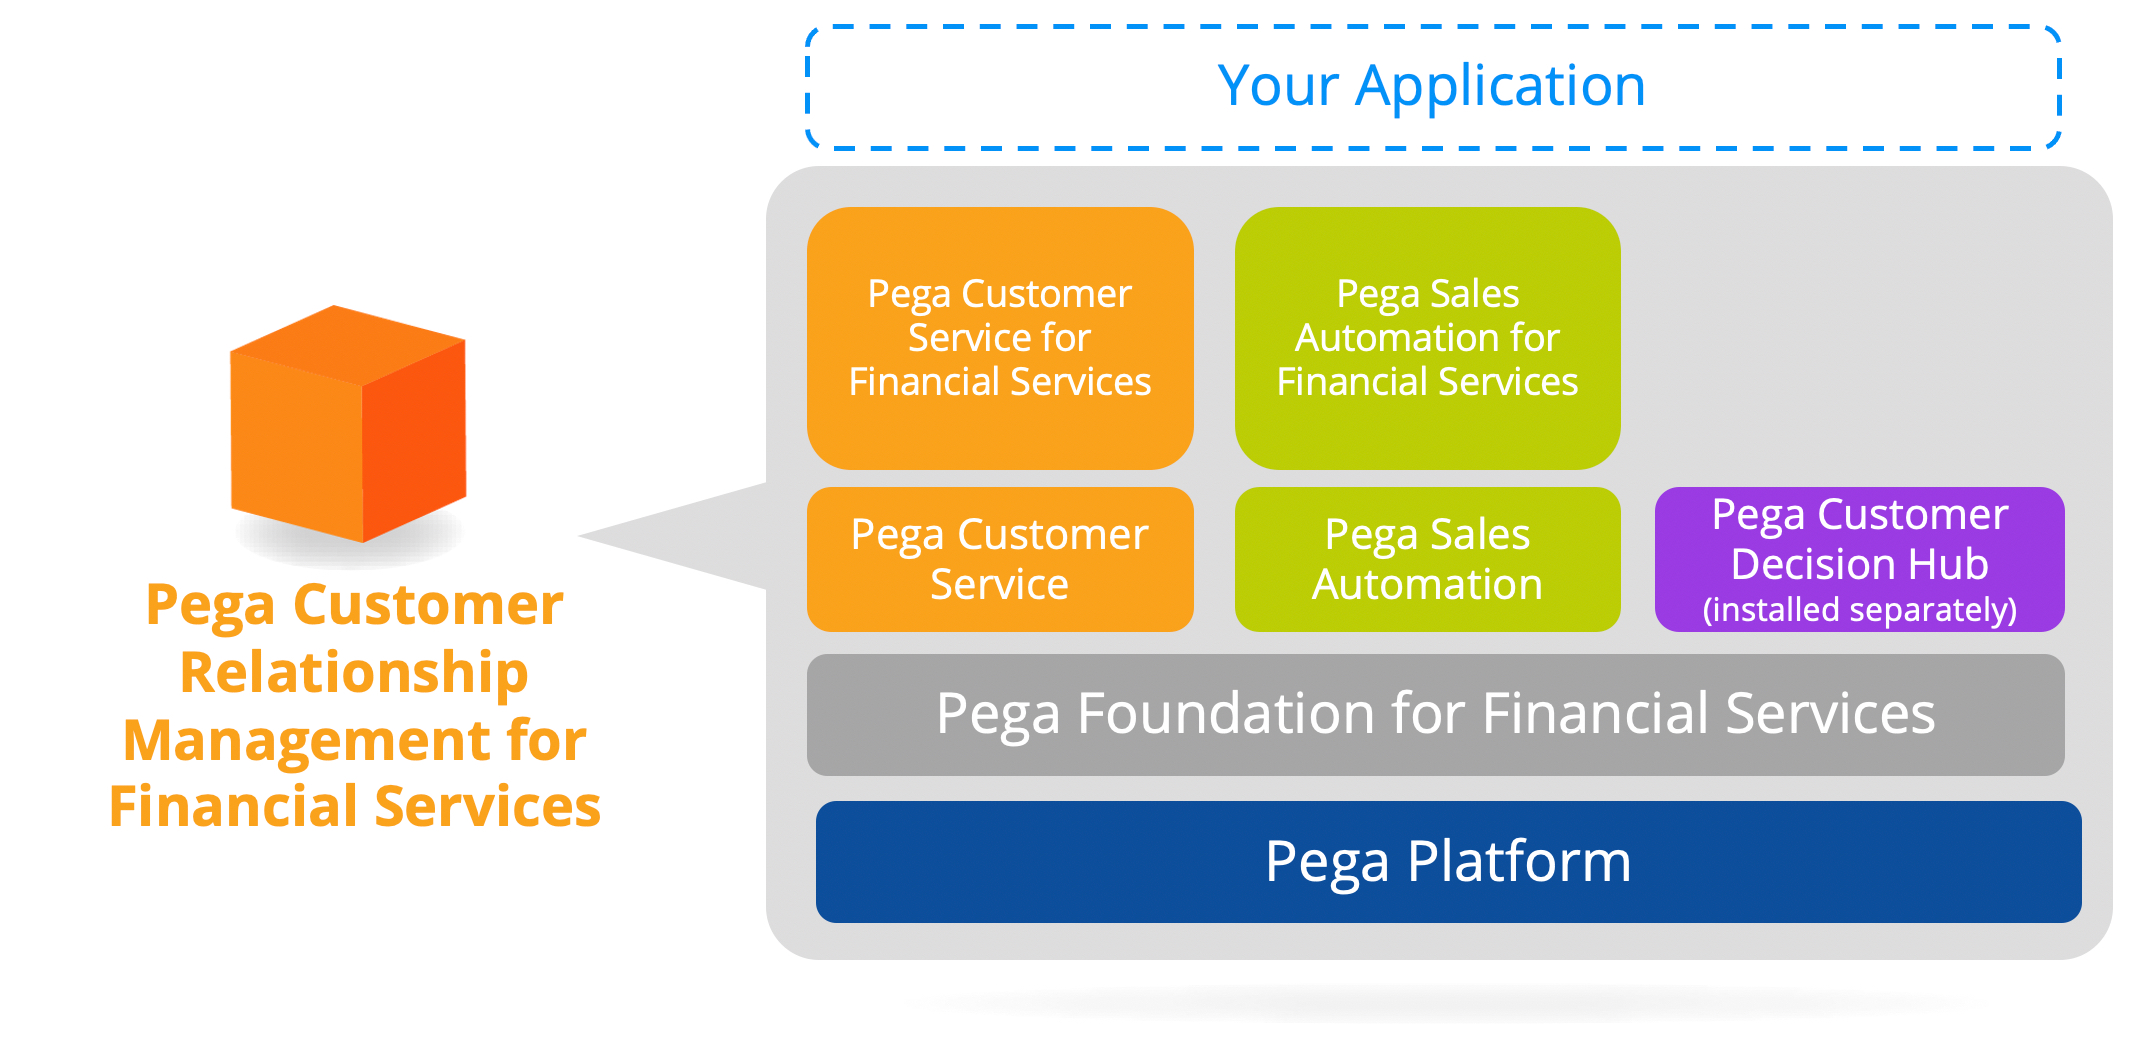 Pega Sales Automation for Financial Services application stack